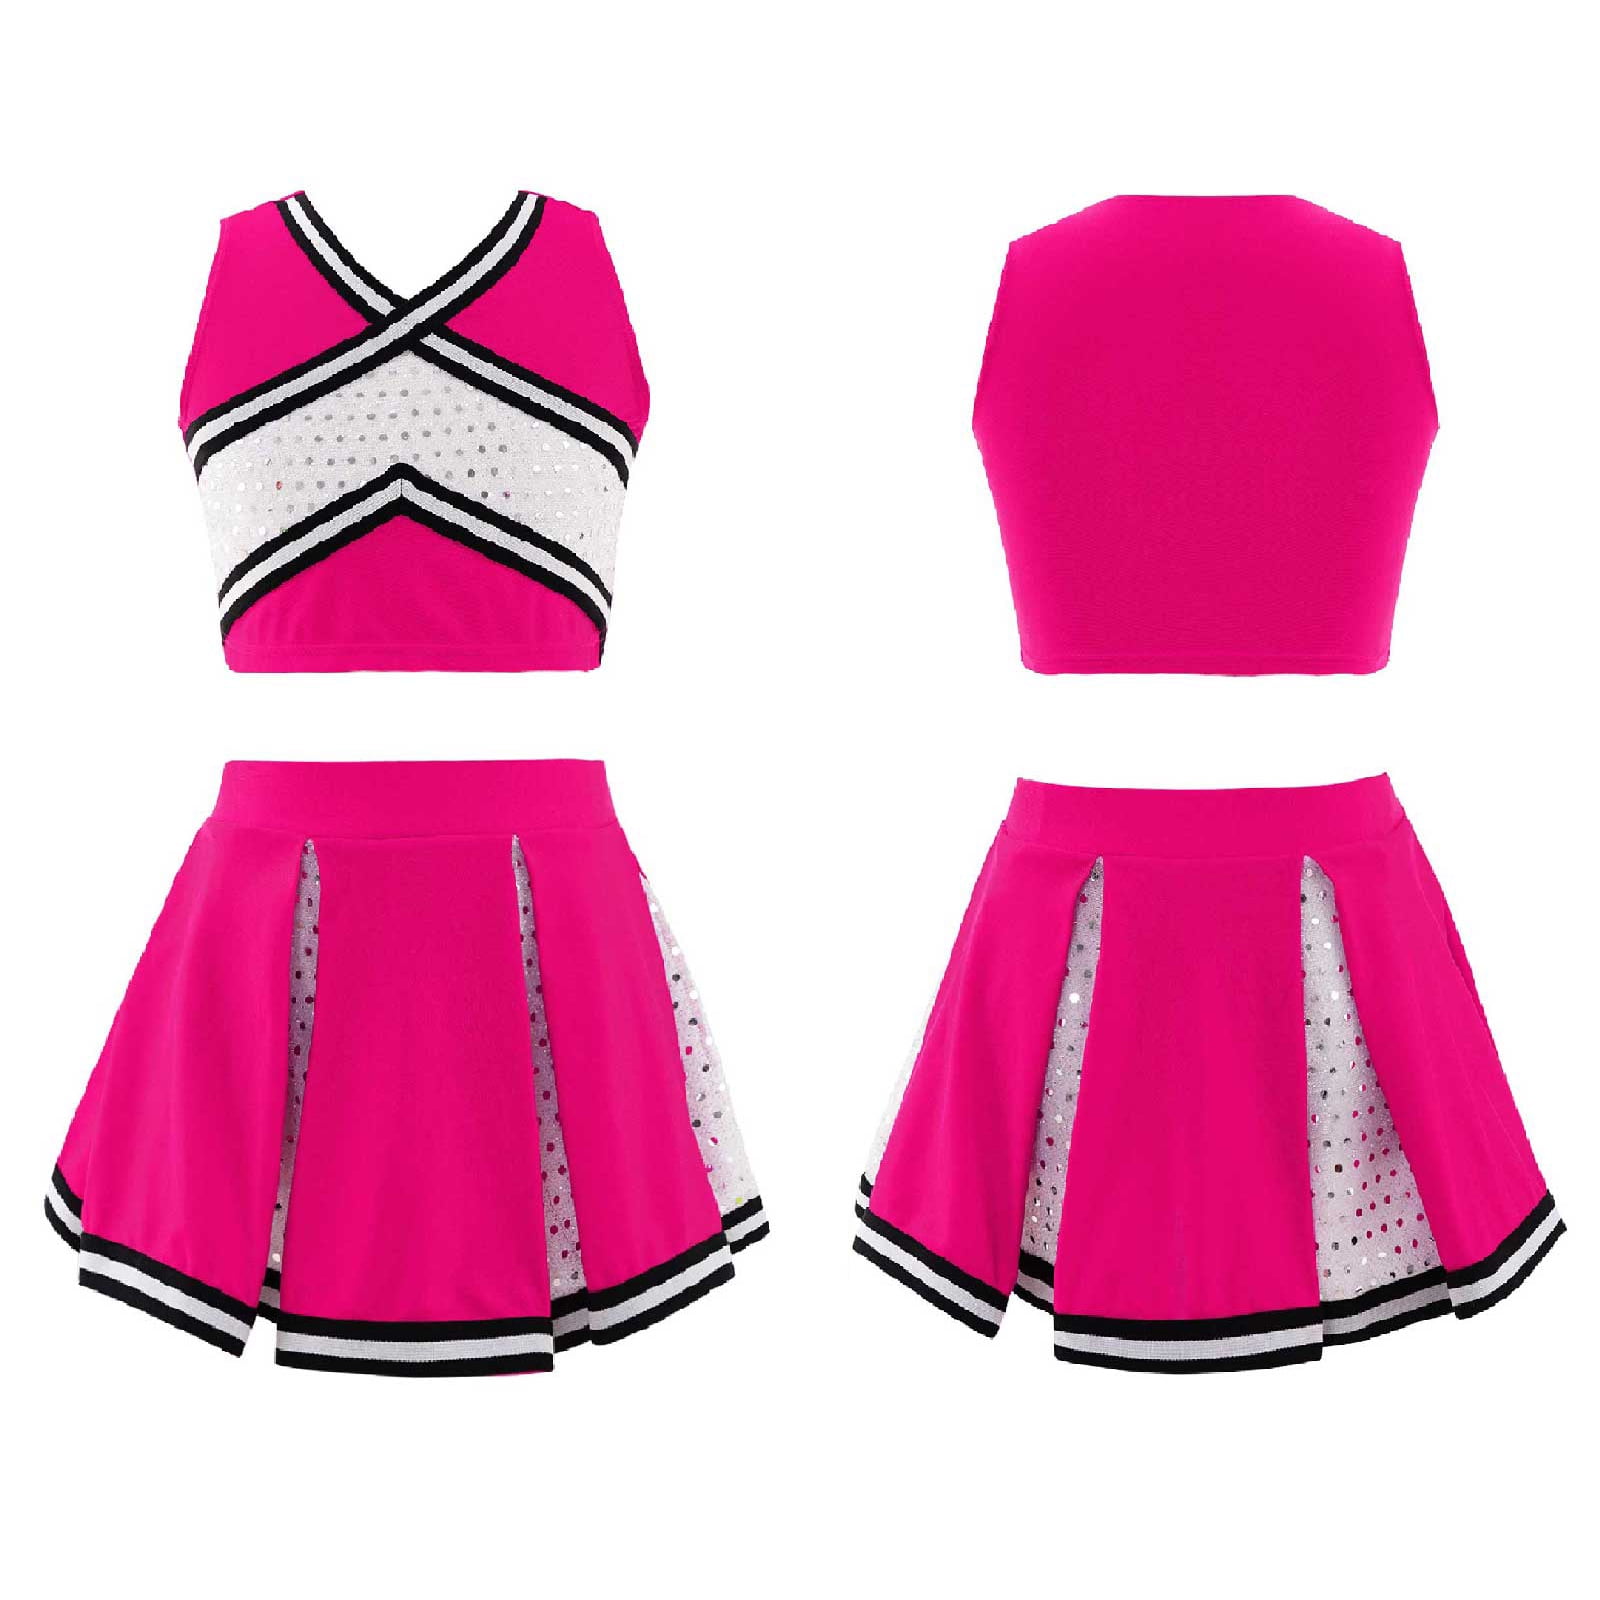 MSemis Kid Girls Cheerleading Dance Outfits Sleeveless Crop Top with ...